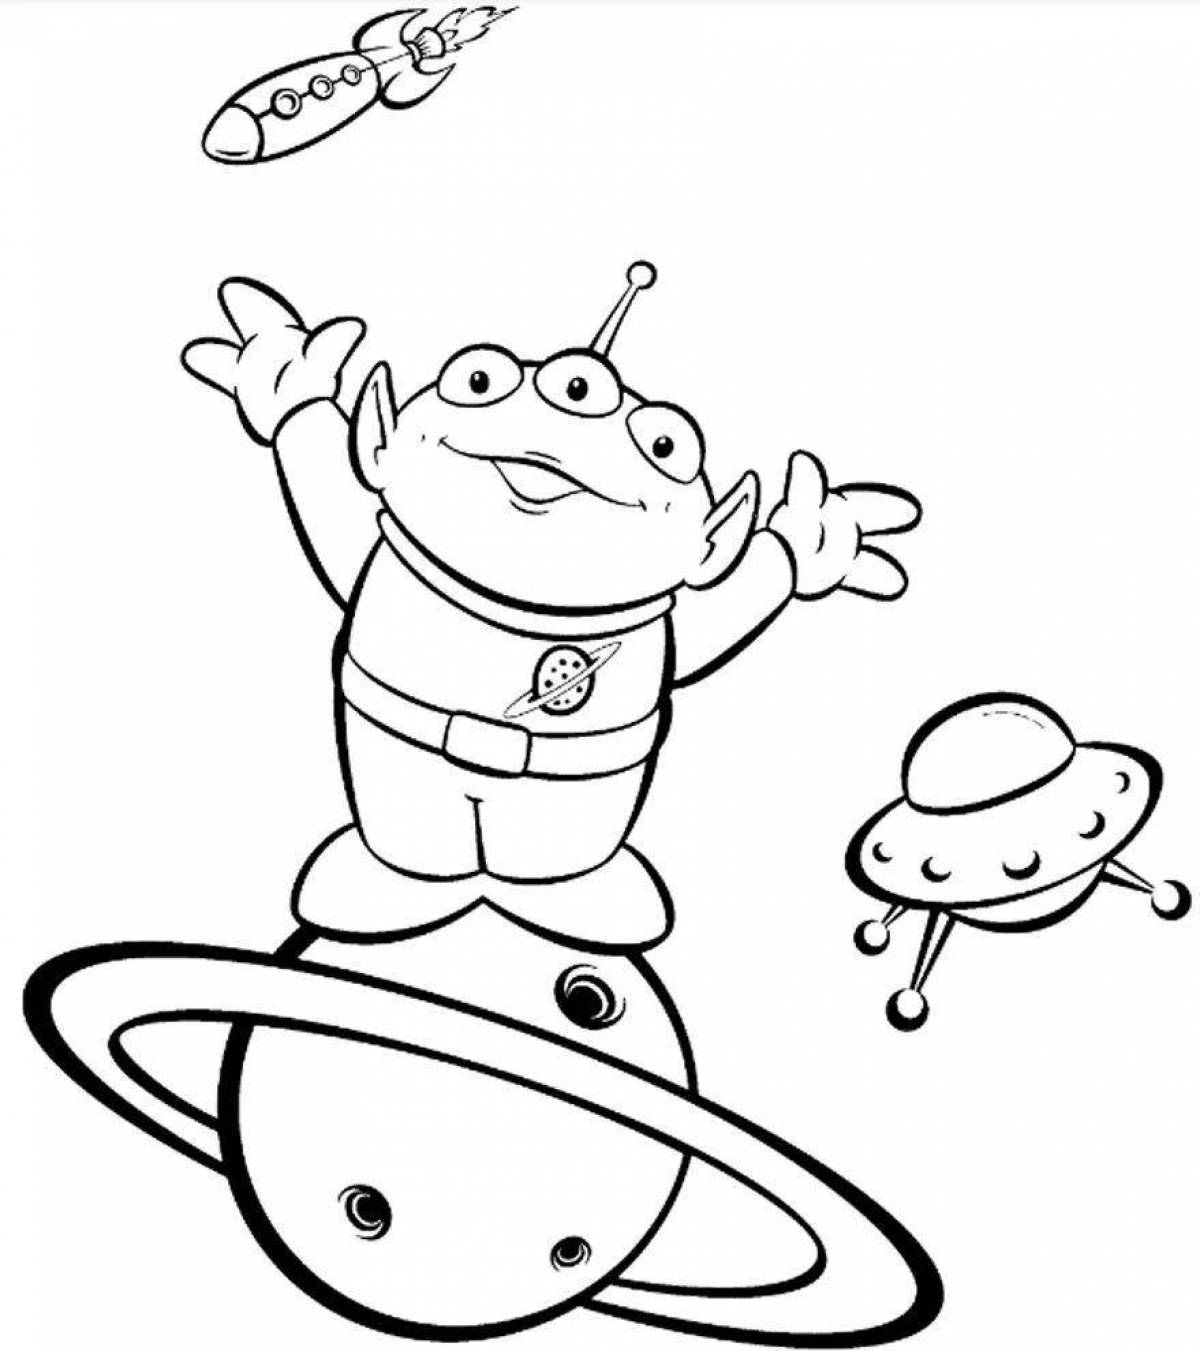 Color-mania aliens coloring page for children